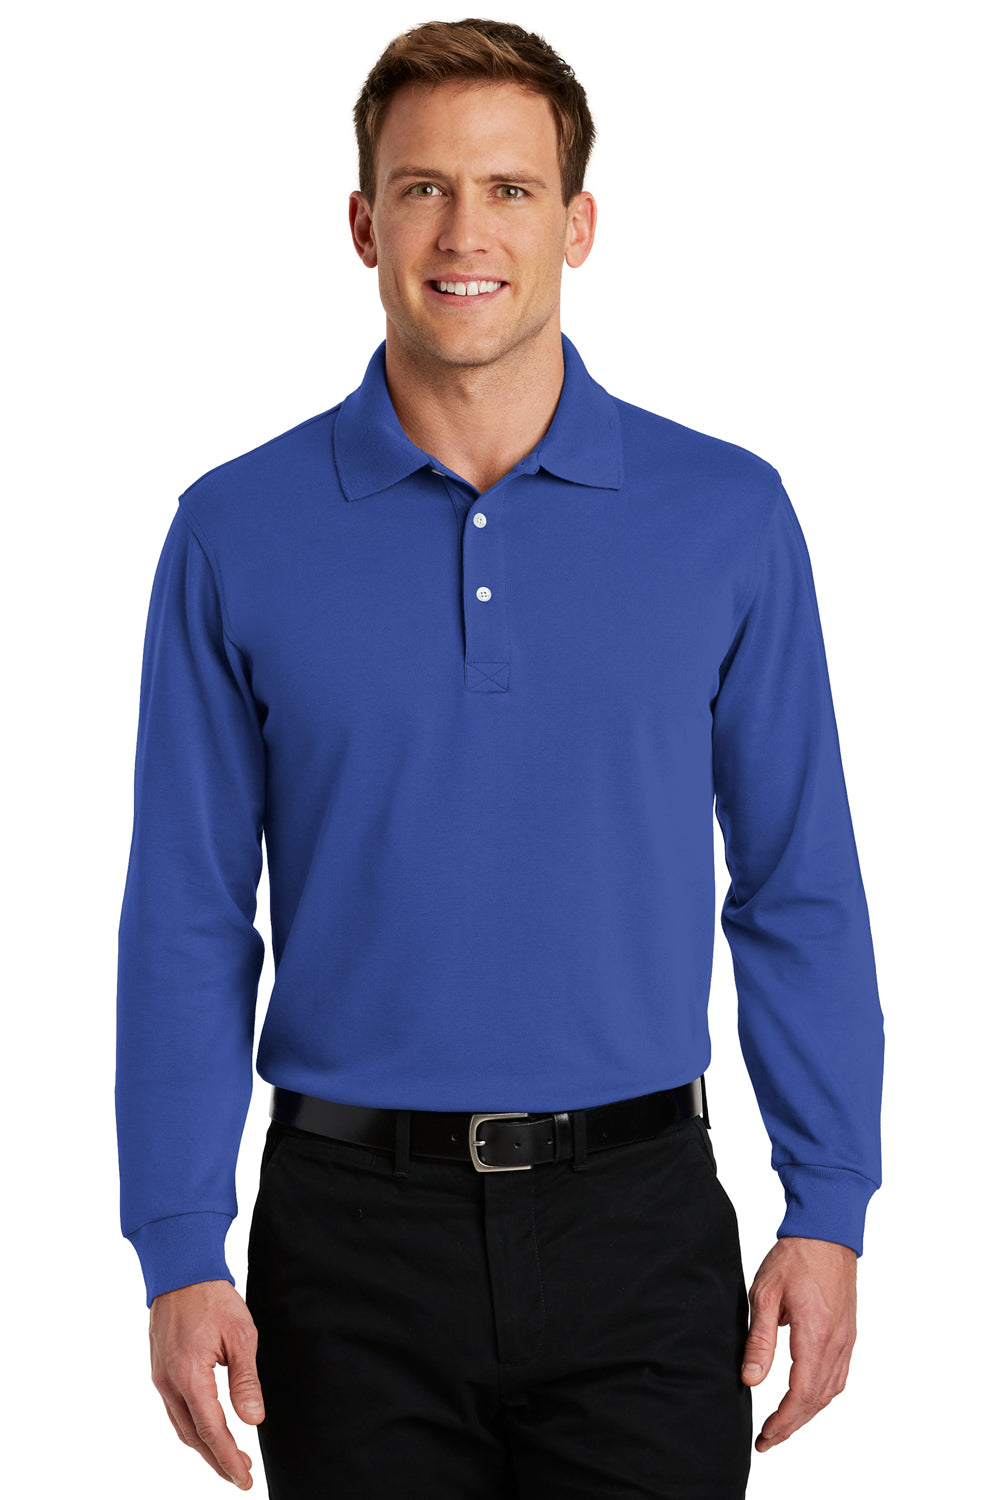 Port Authority K455LS Mens Rapid Dry Moisture Wicking Long Sleeve Polo Shirt Royal Blue Front